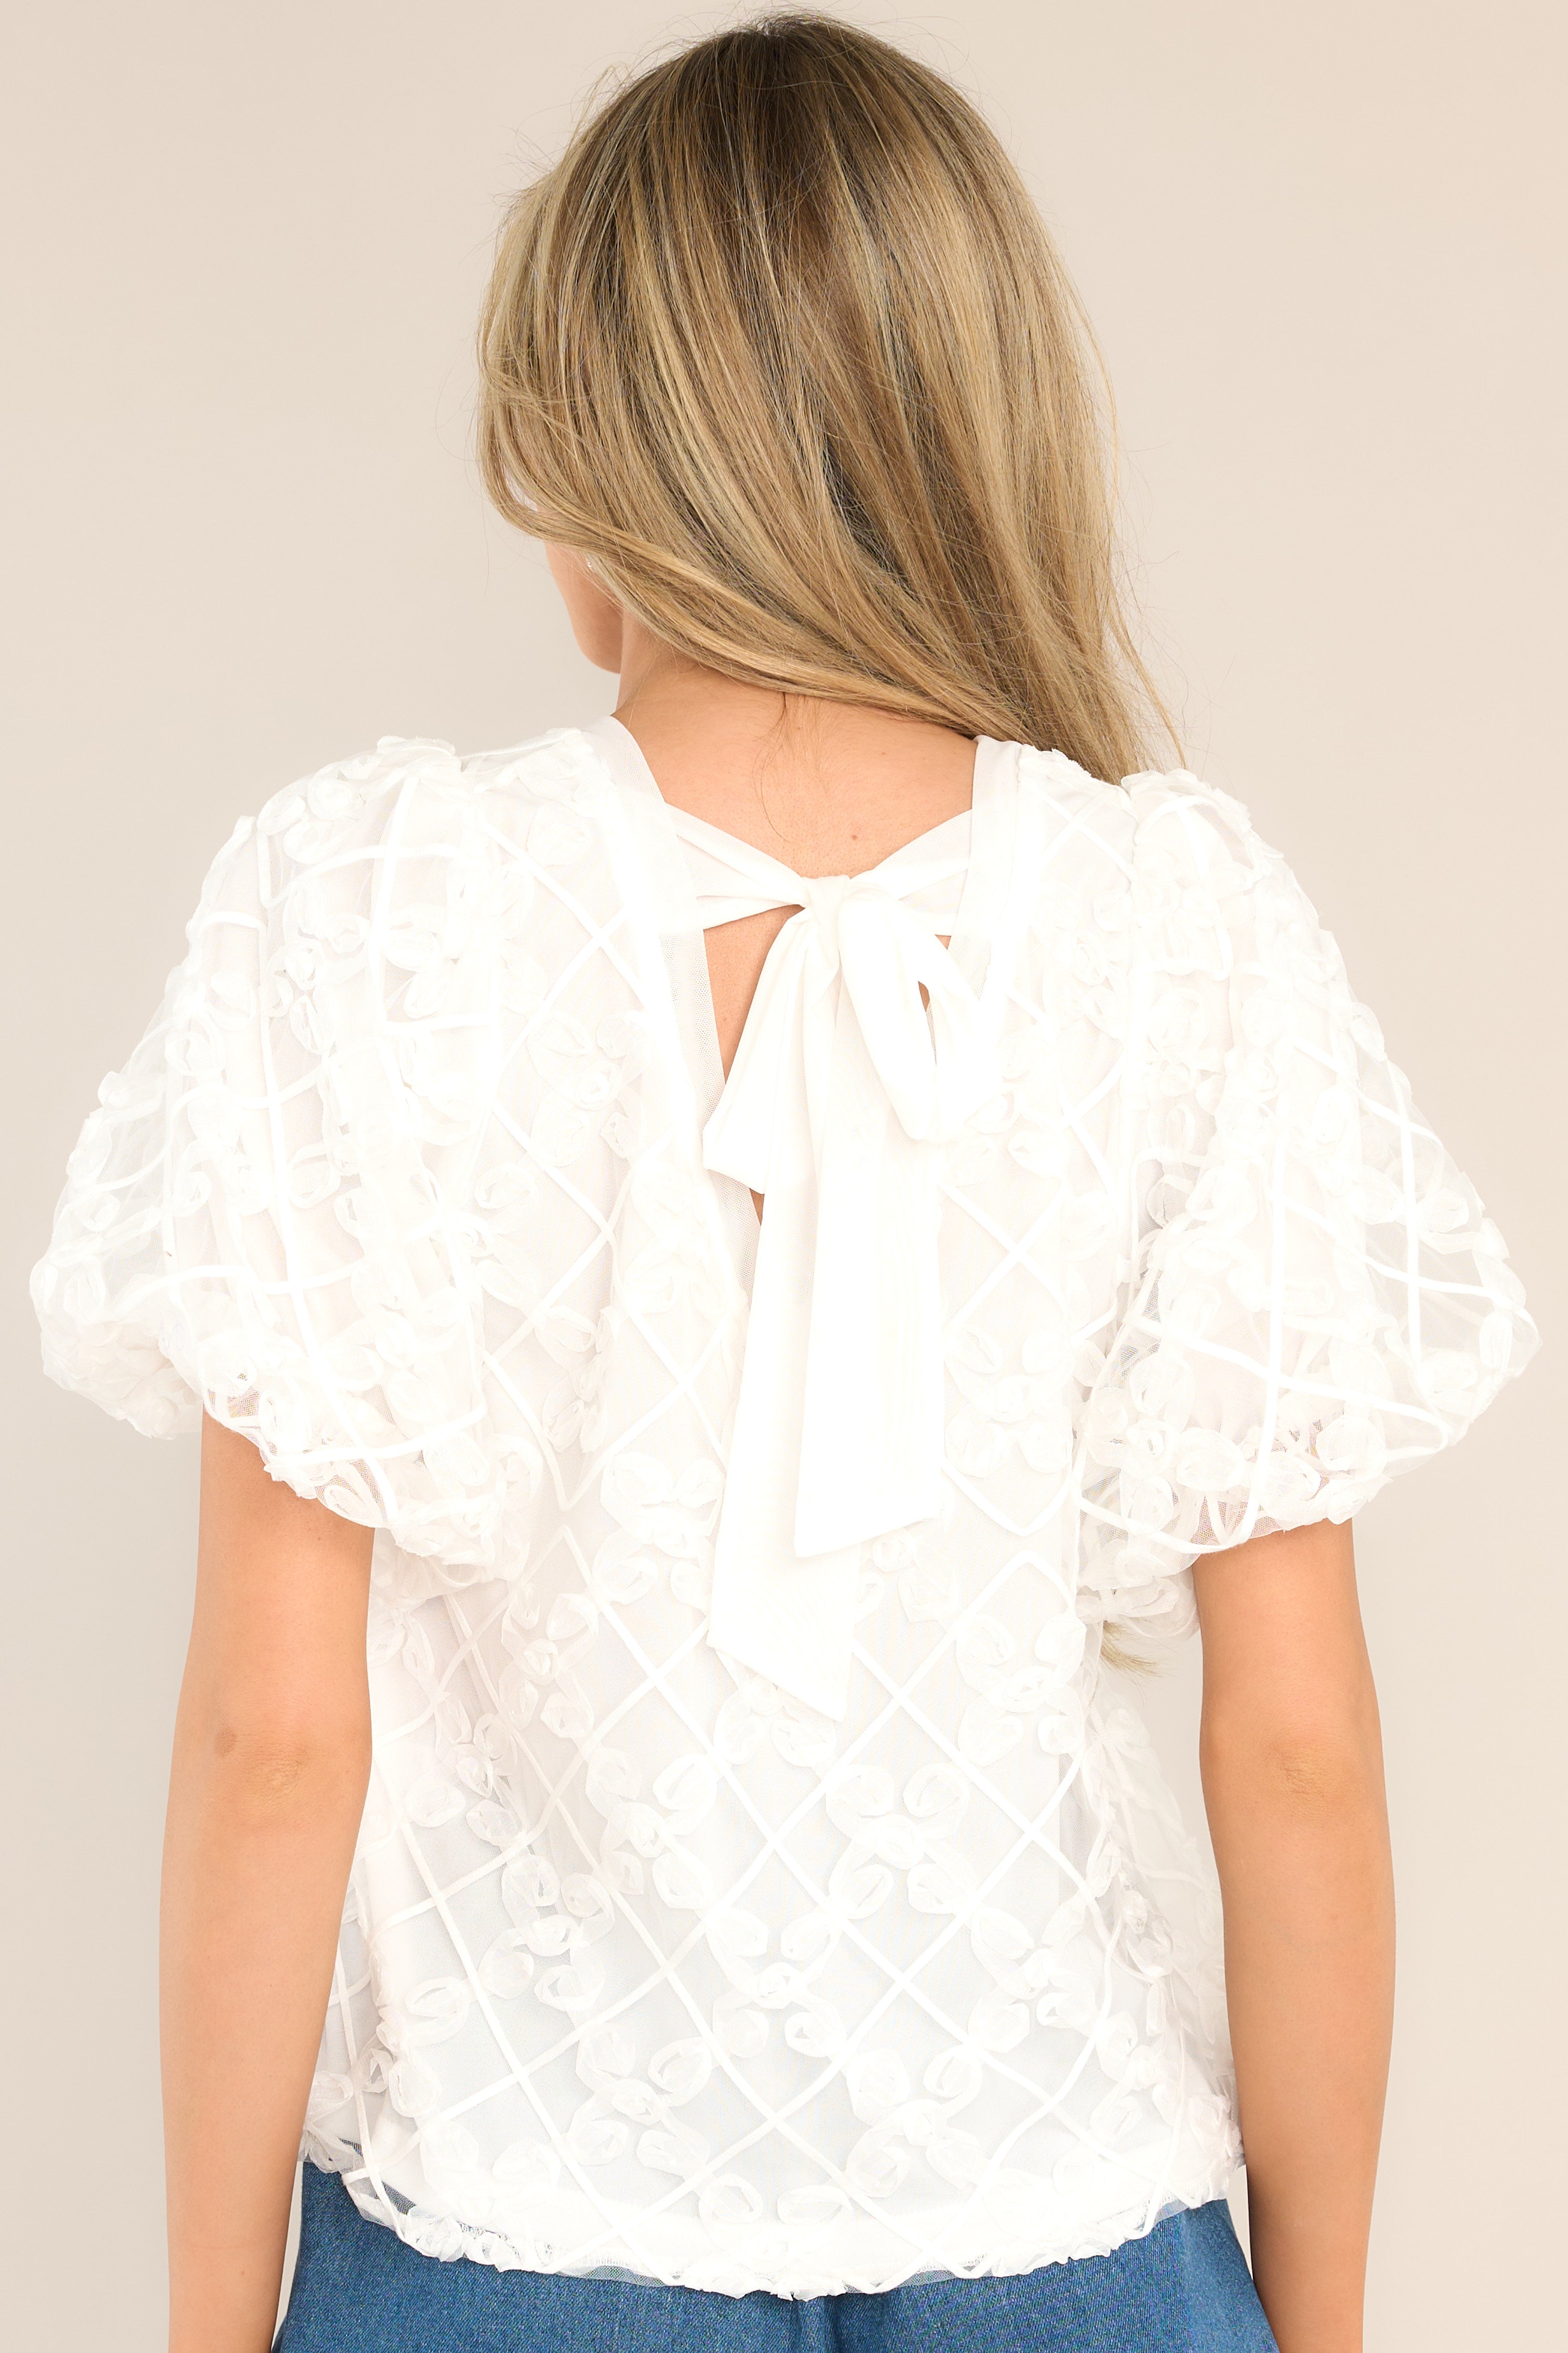 Back view of this top that features a crew neckline, a self-tie feature at the back of the neck, a textured lace pattern, and elastic cuffed puffed sleeves.